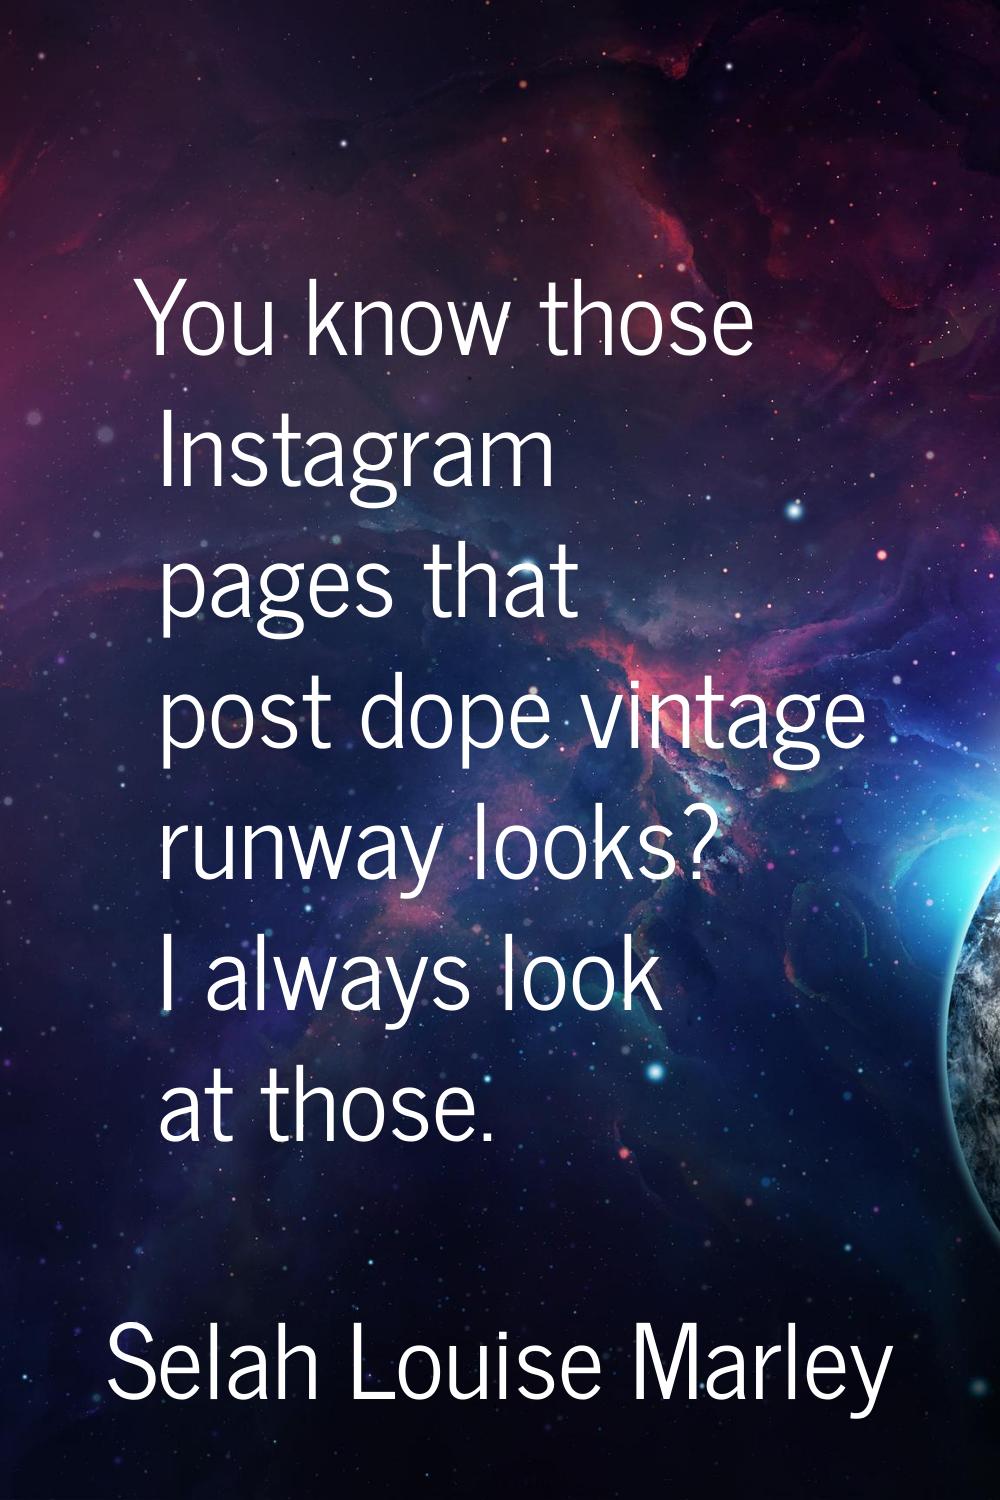 You know those Instagram pages that post dope vintage runway looks? I always look at those.